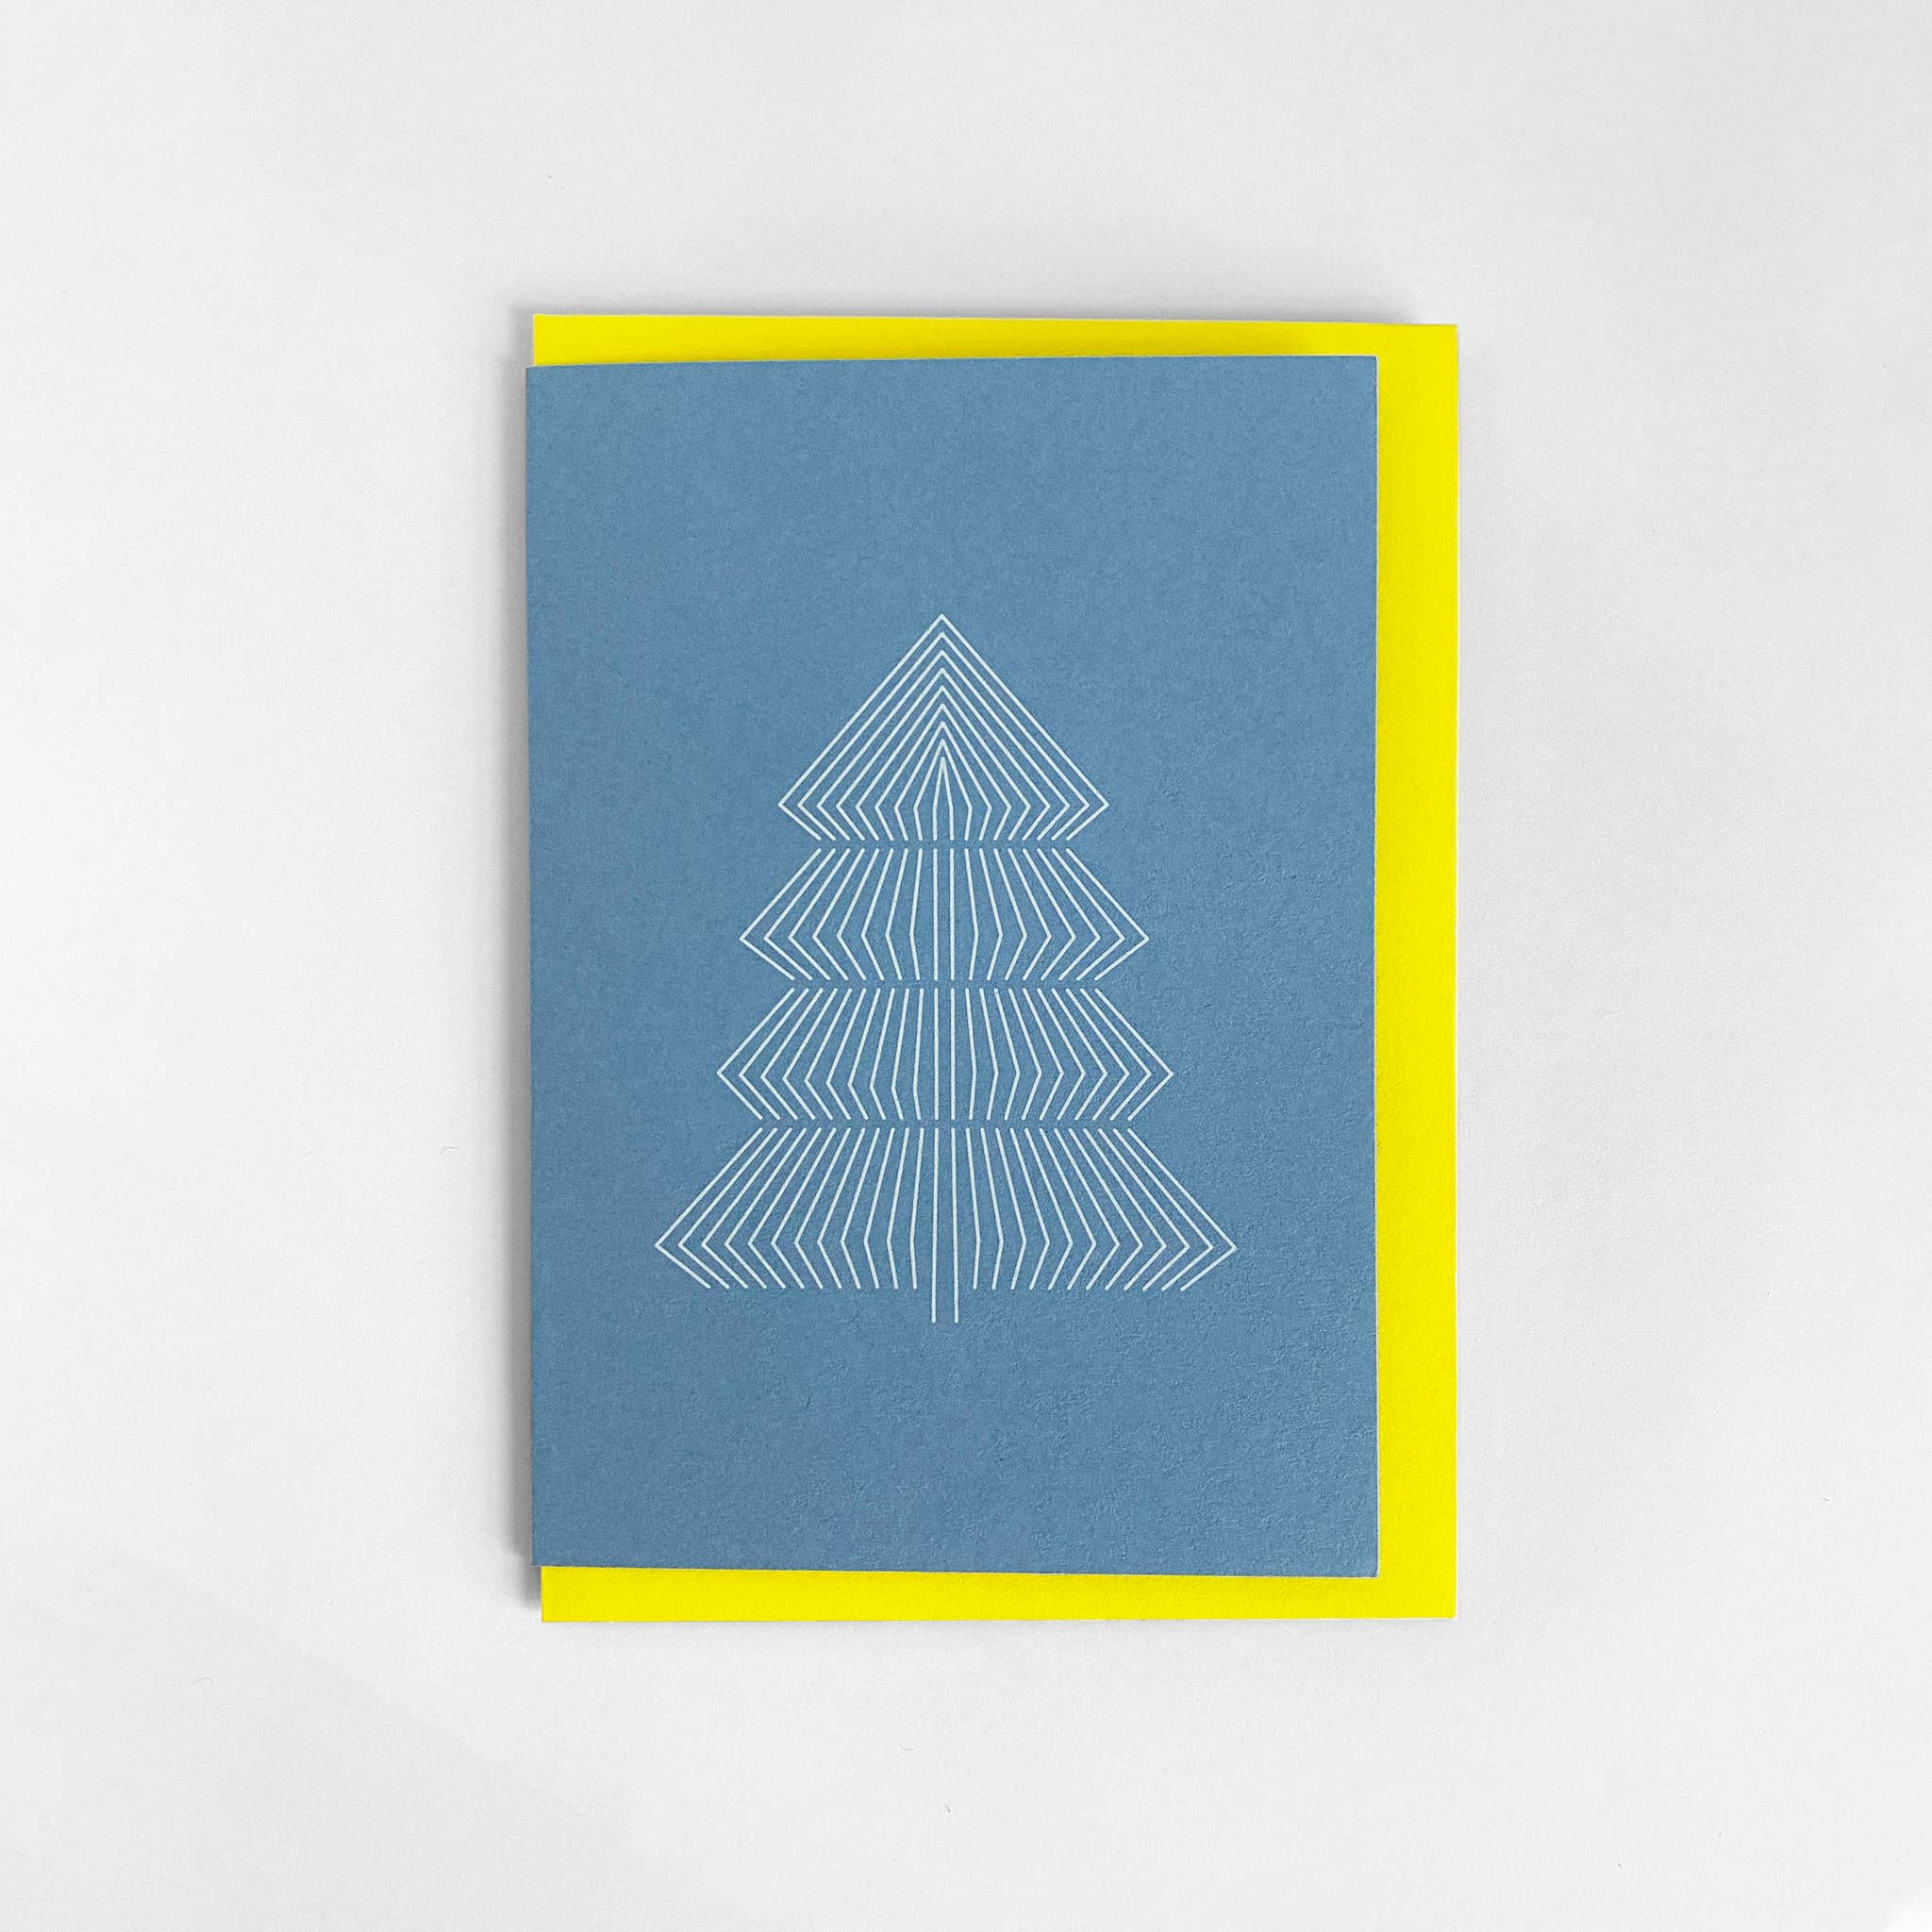 Sky blue A6 christmas greeting card with graphic print of fir tree and bright yellow envelope